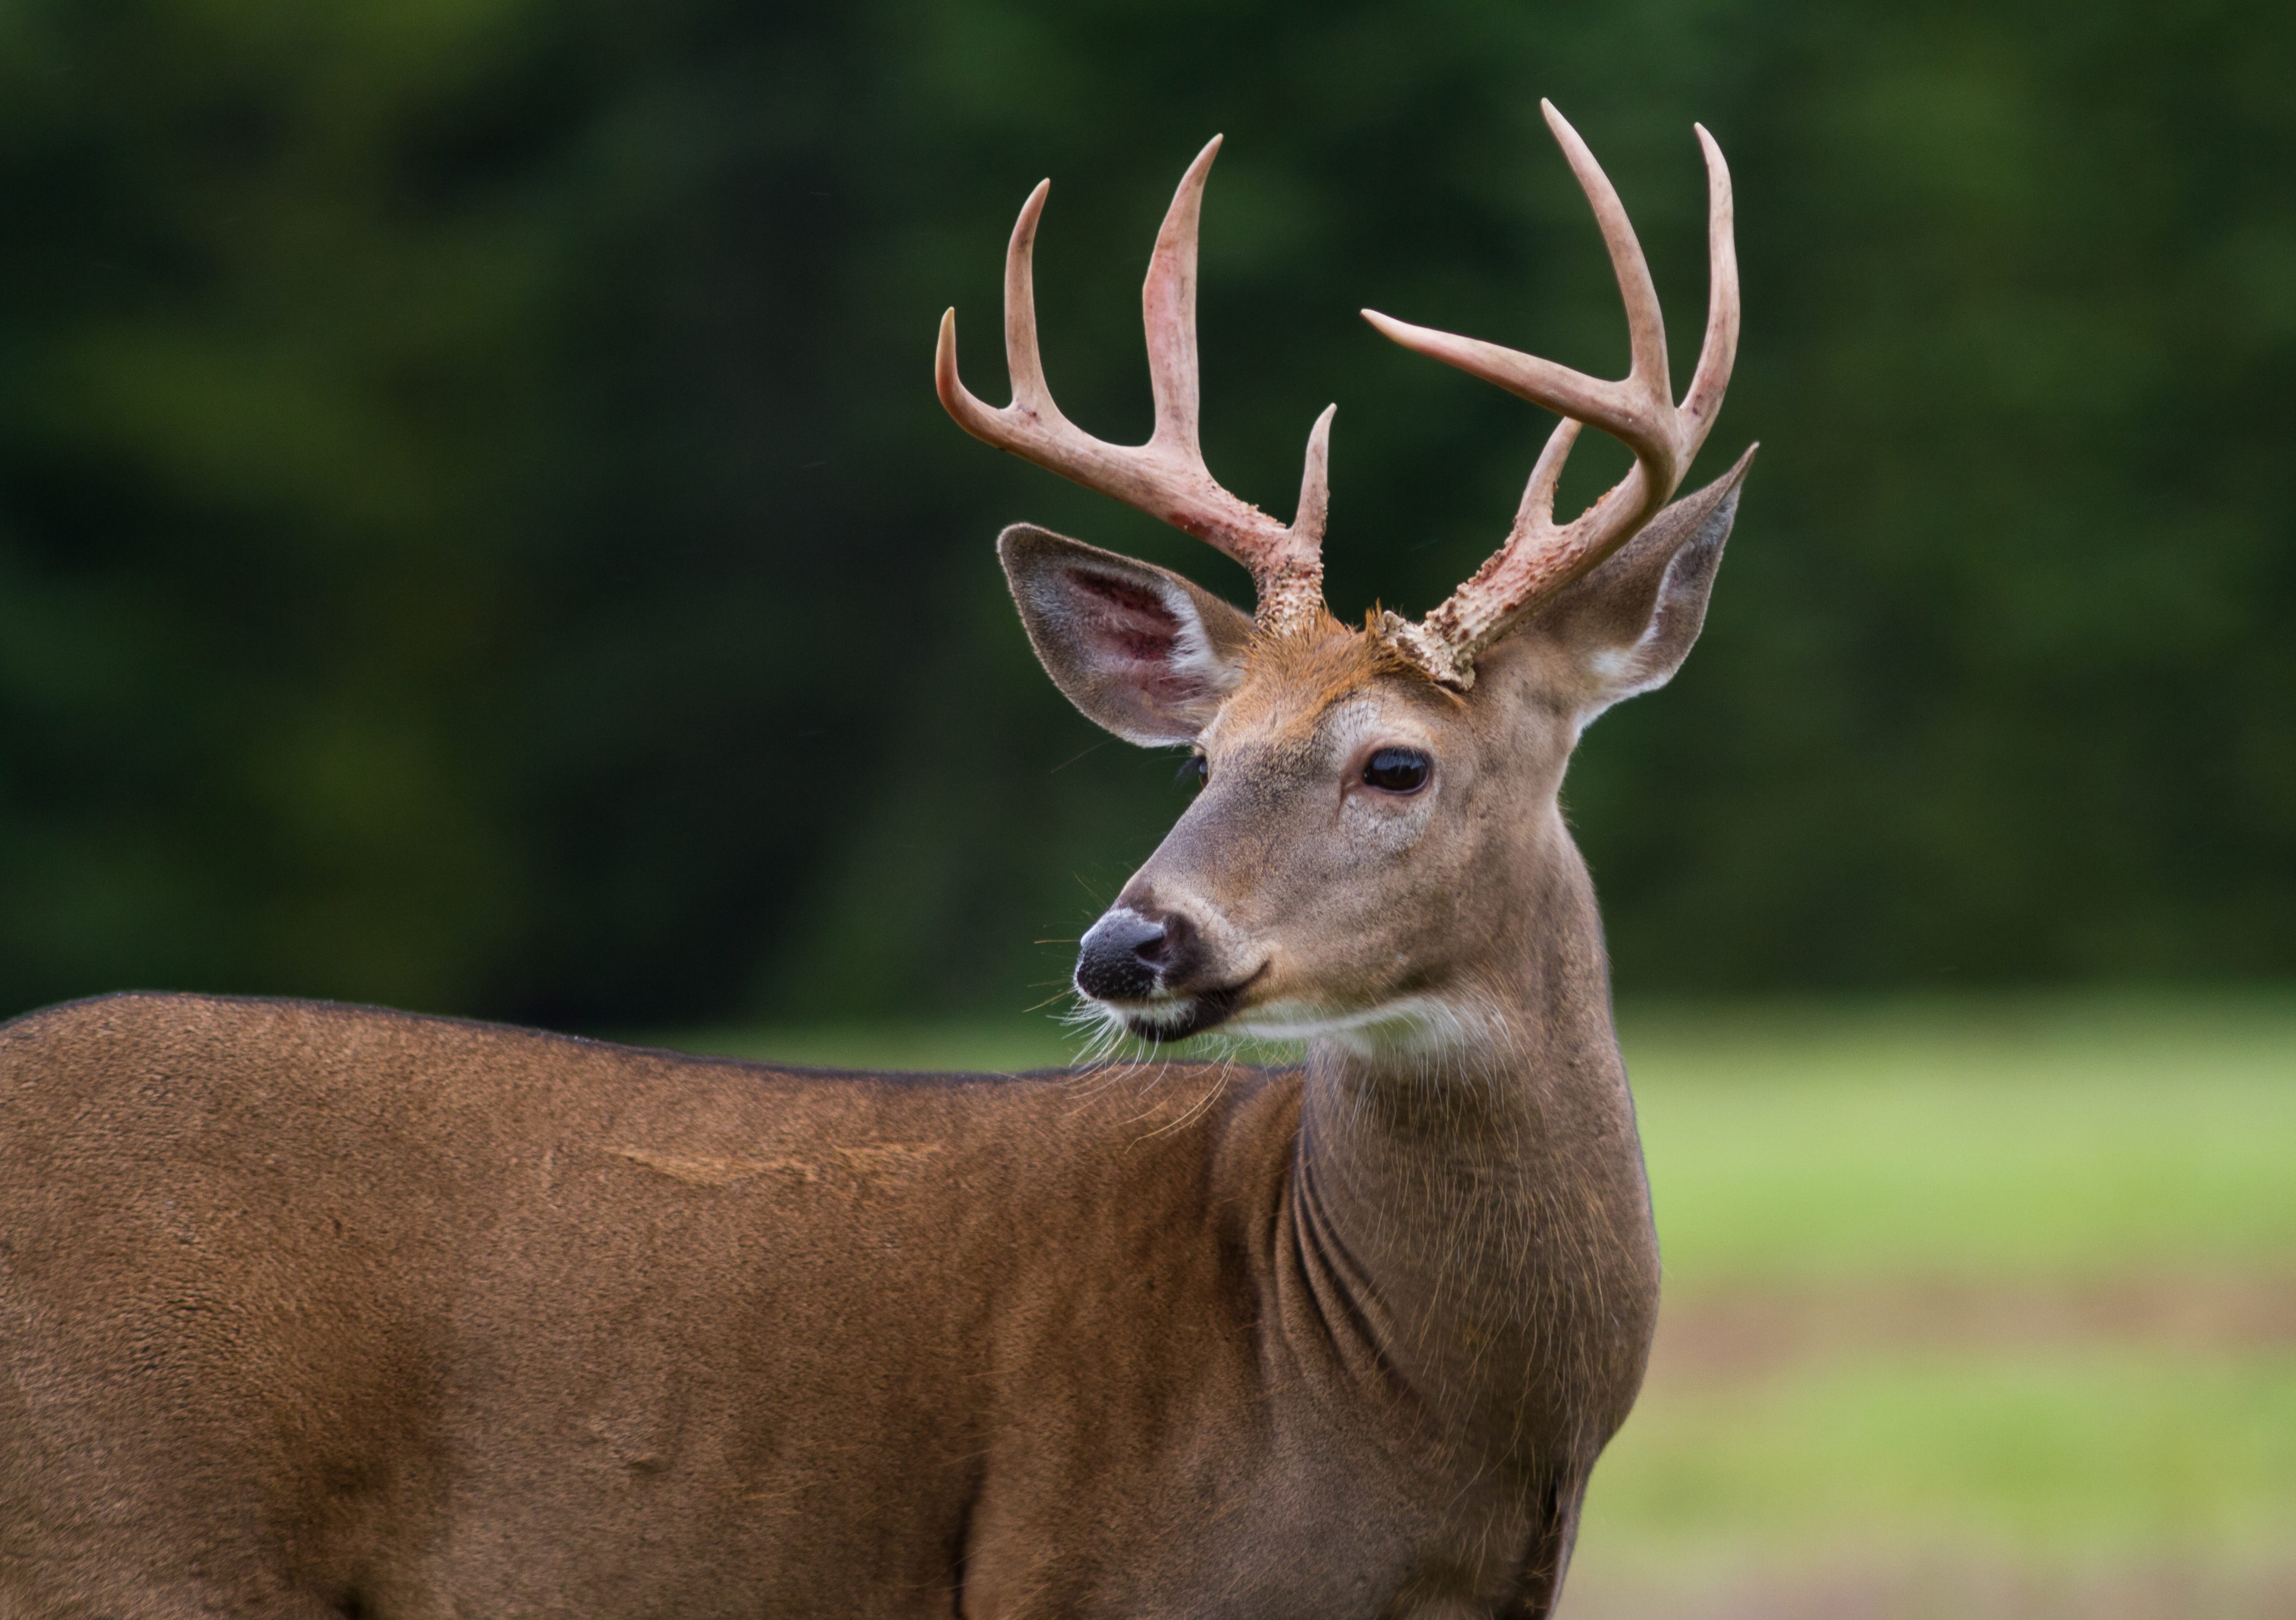 Go Ahead, if you want to, Eating Venison Won’t Give You Lyme Disease